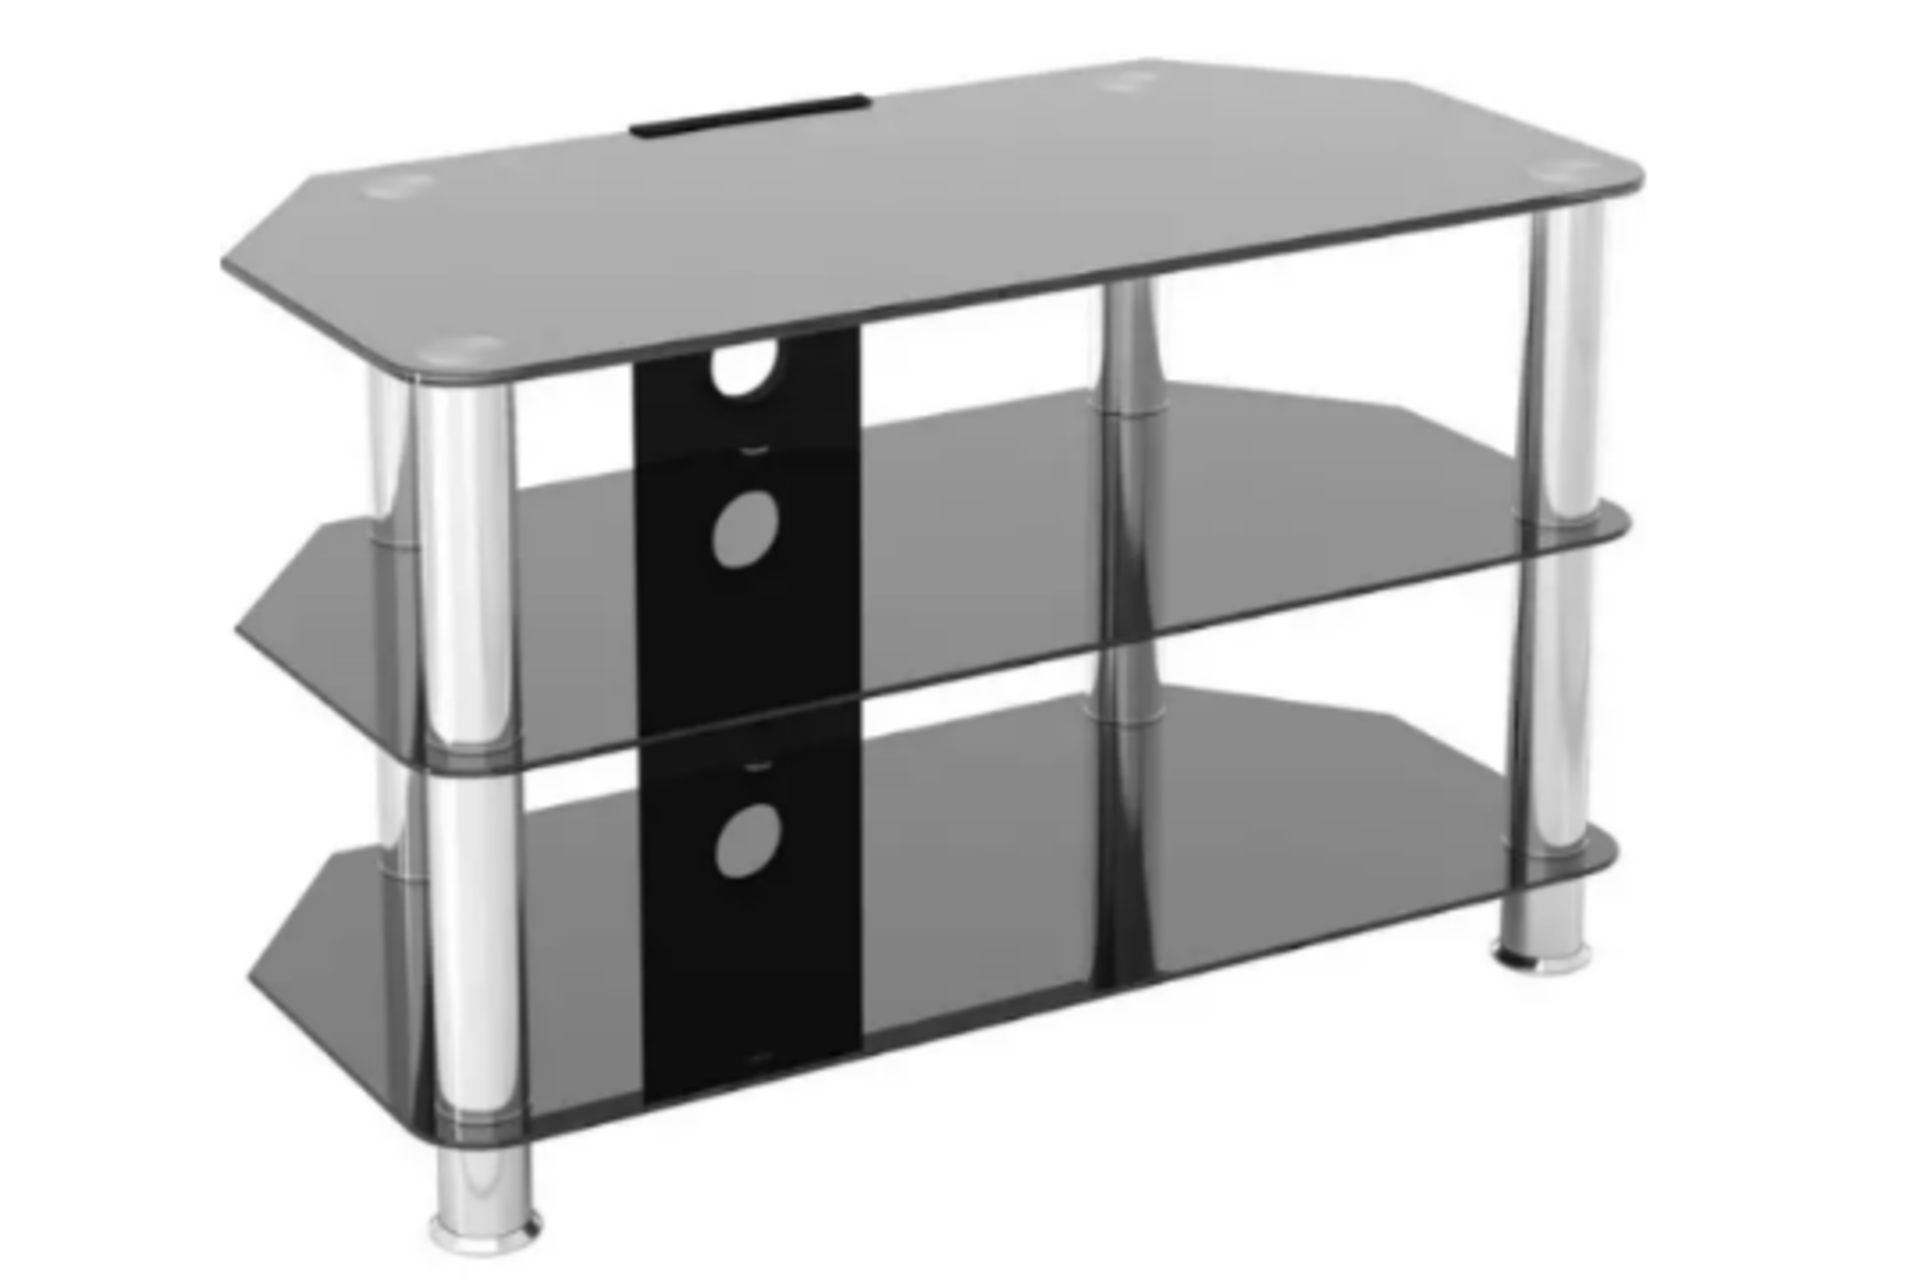 PALLET TO CONTAIN 30 x NEW LIVING GLASS TV STANDS. BLACK TEMPERED GLASS WITH STAINLESS STEEL LEGS. - Image 4 of 5